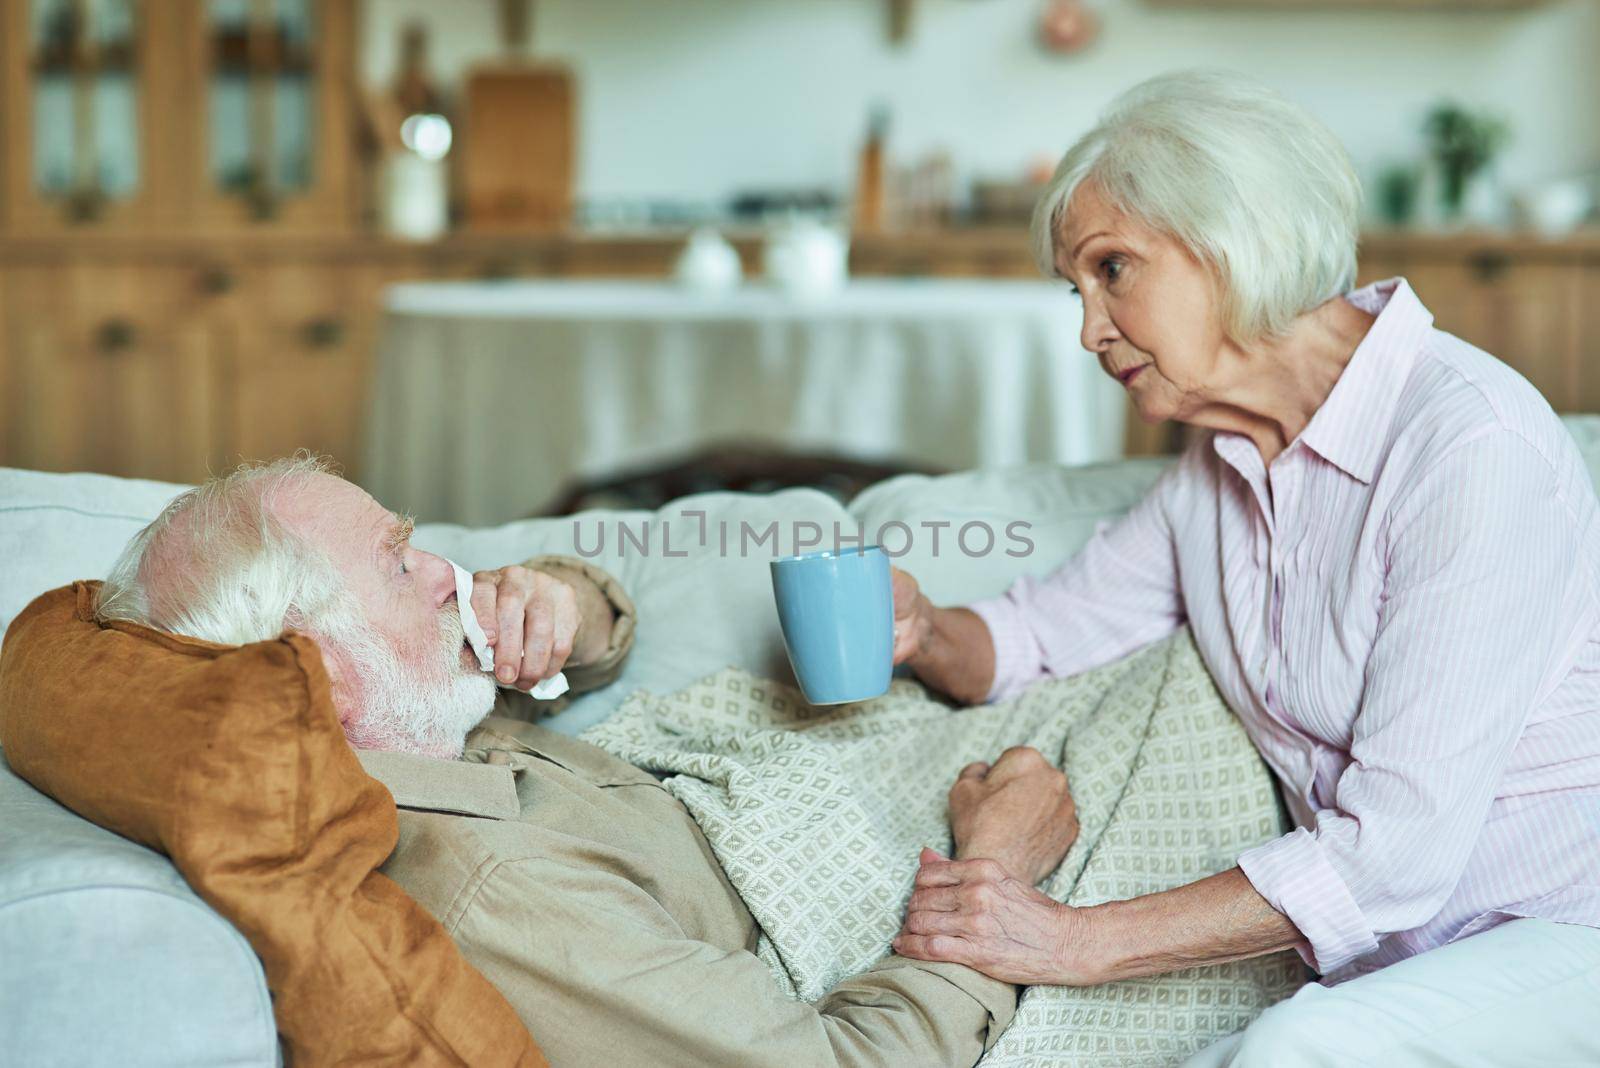 Elderly man is sick and lying on the couch under a warm blanket by friendsstock